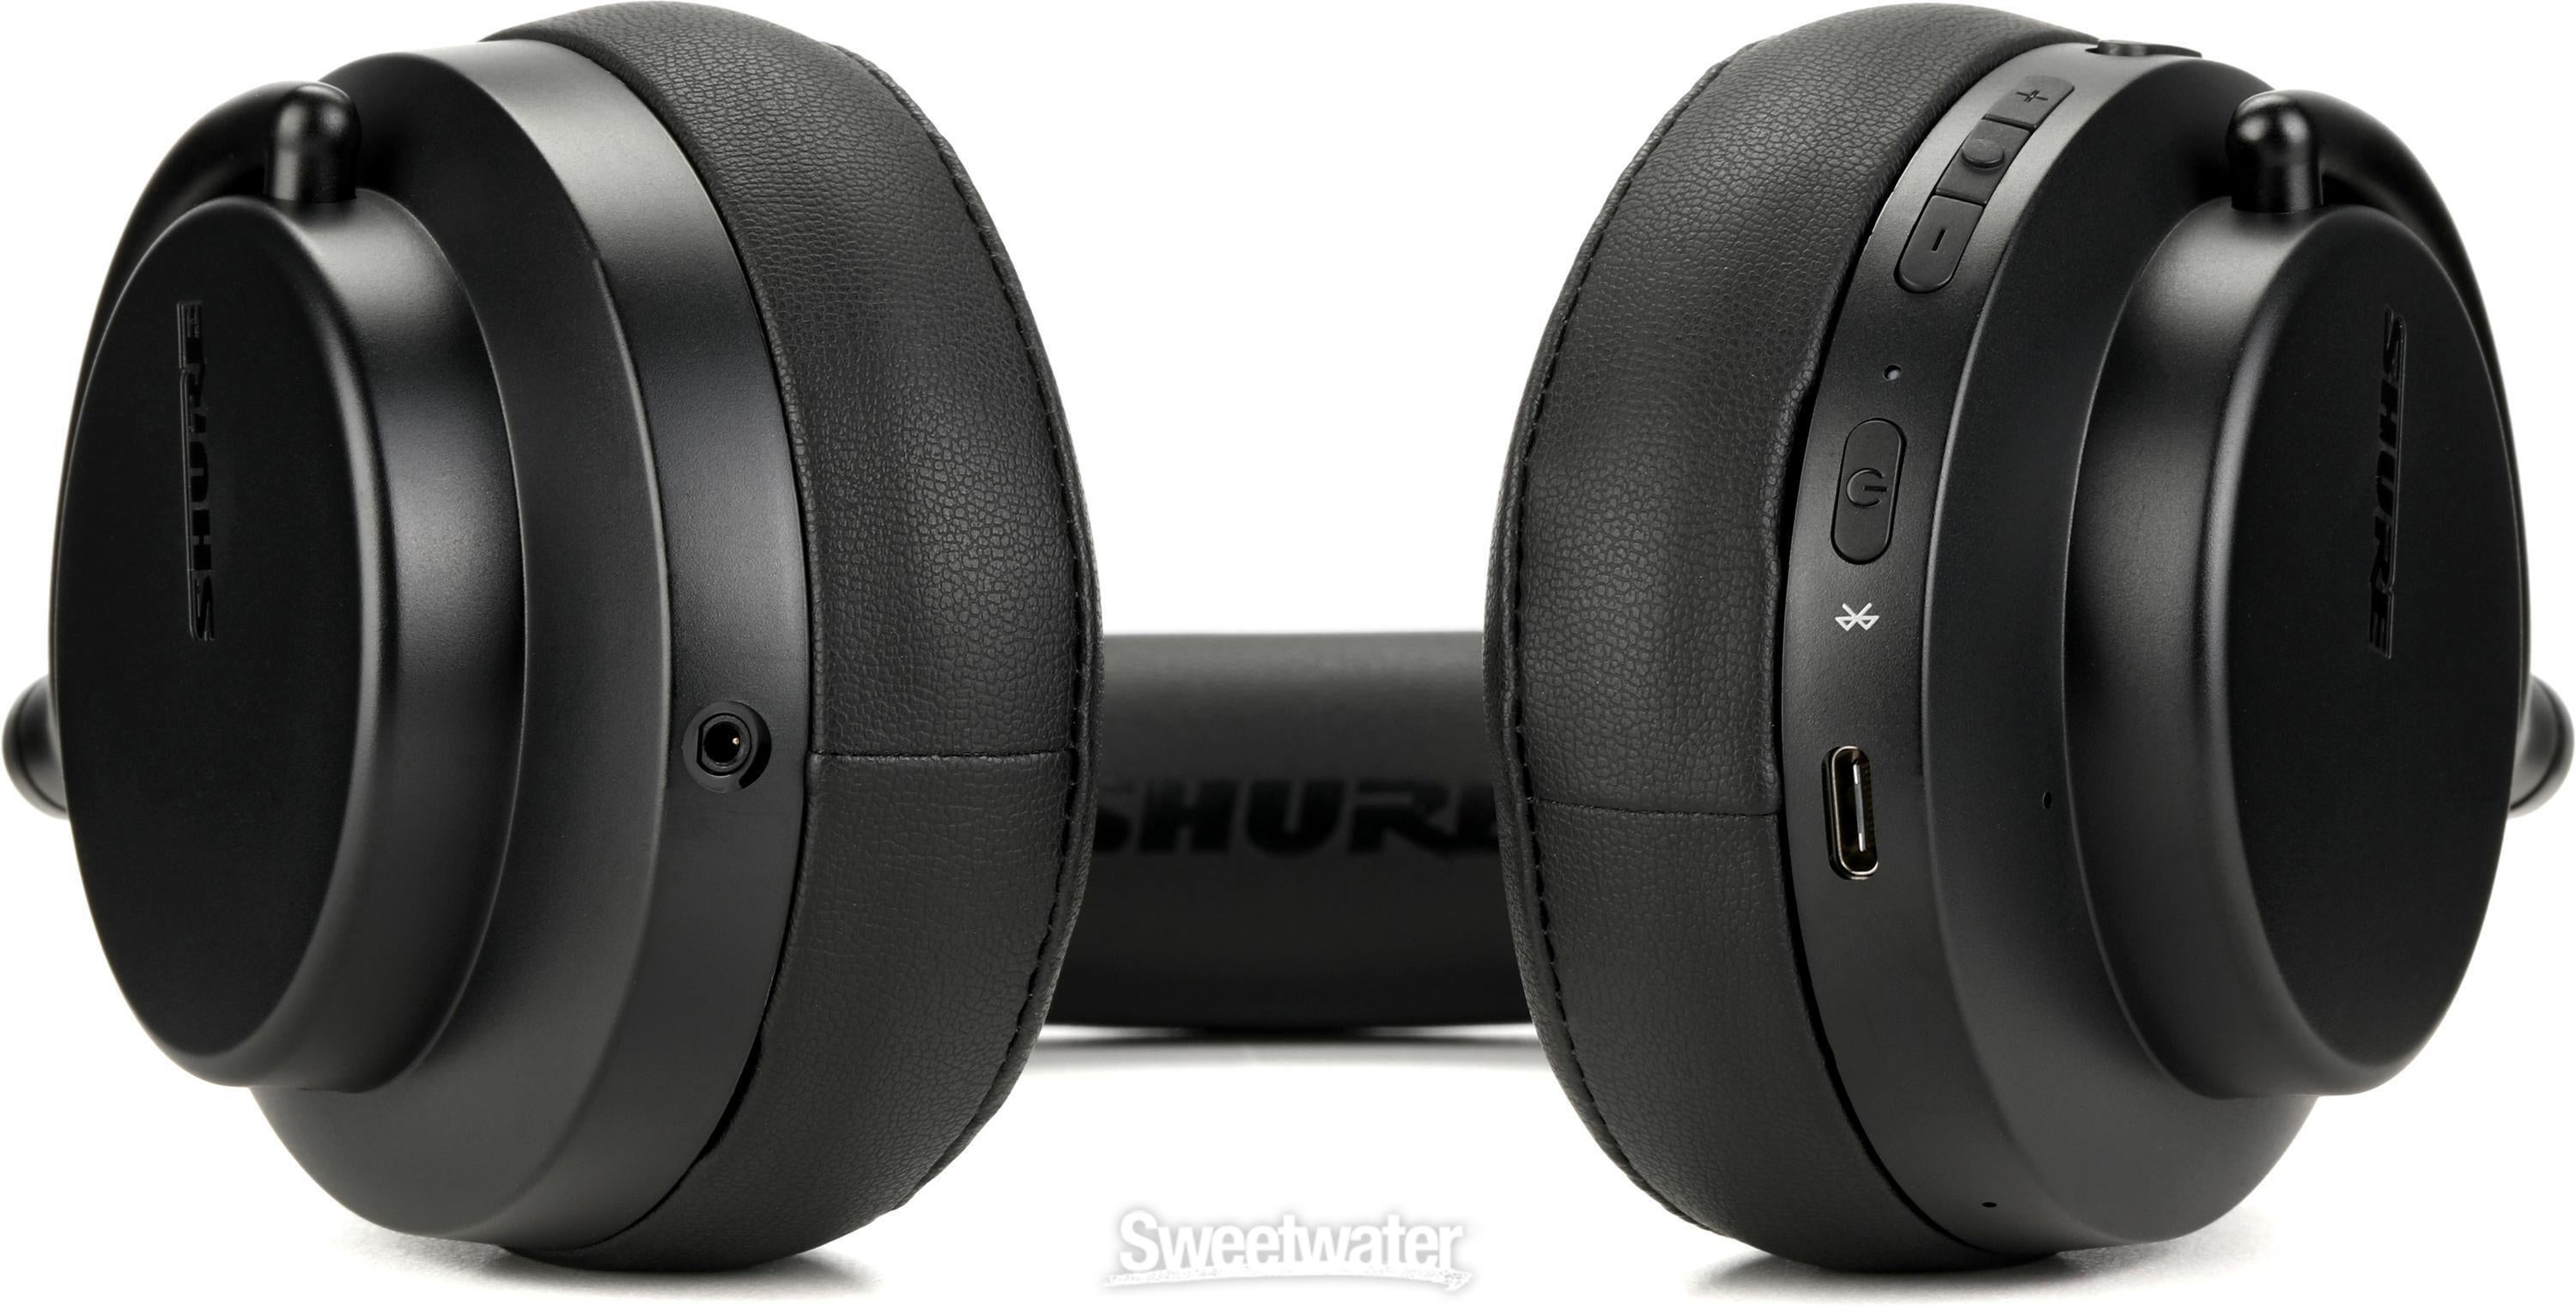 AONIC 50 GEN 2 - Wireless Noise Cancelling Headphones - Shure USA